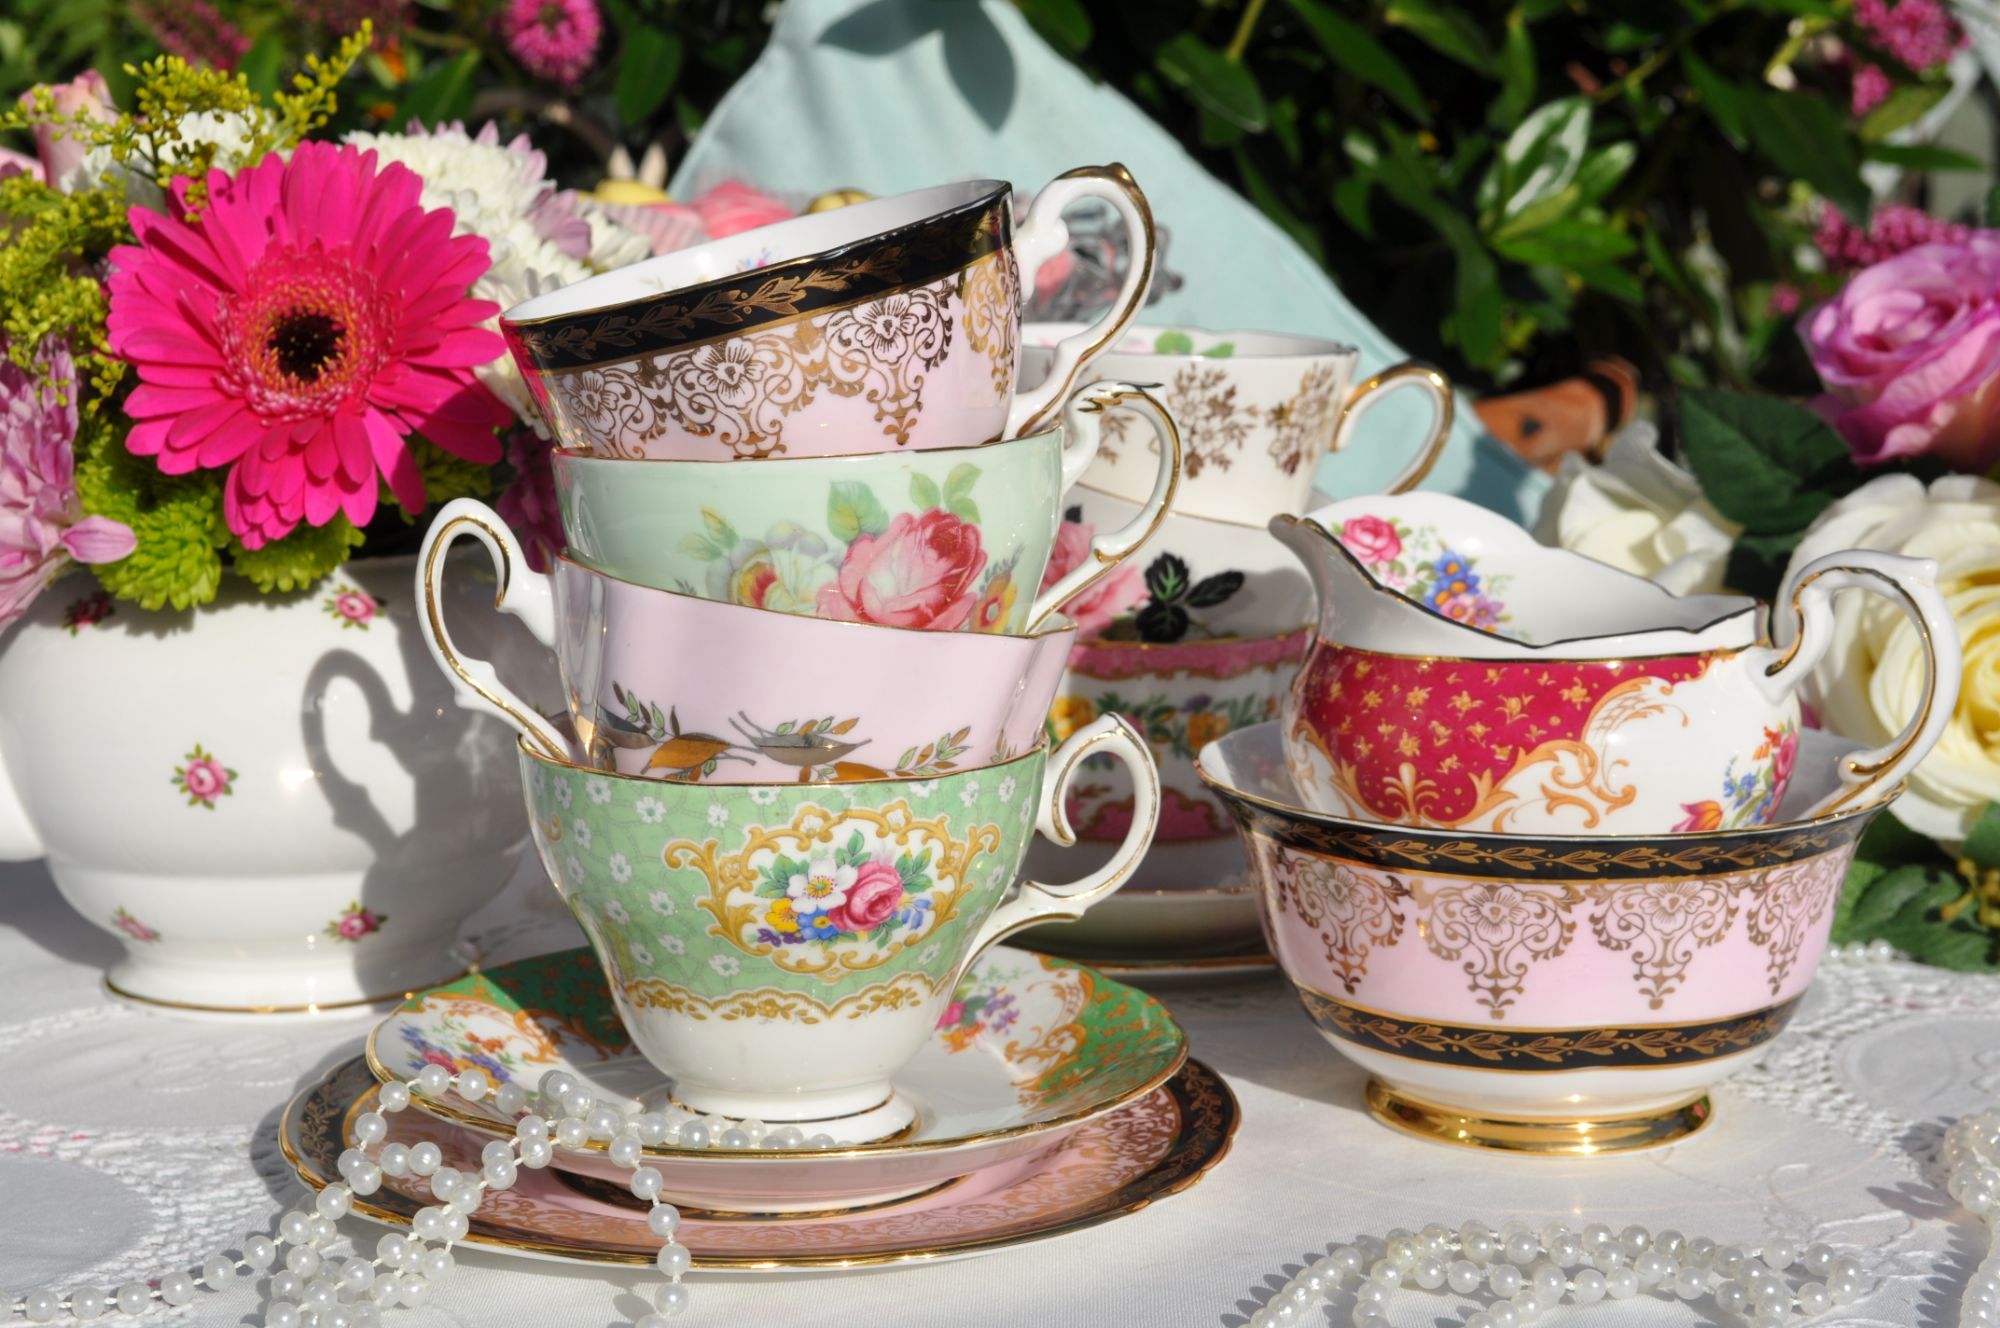 Pretty teacups and saucers